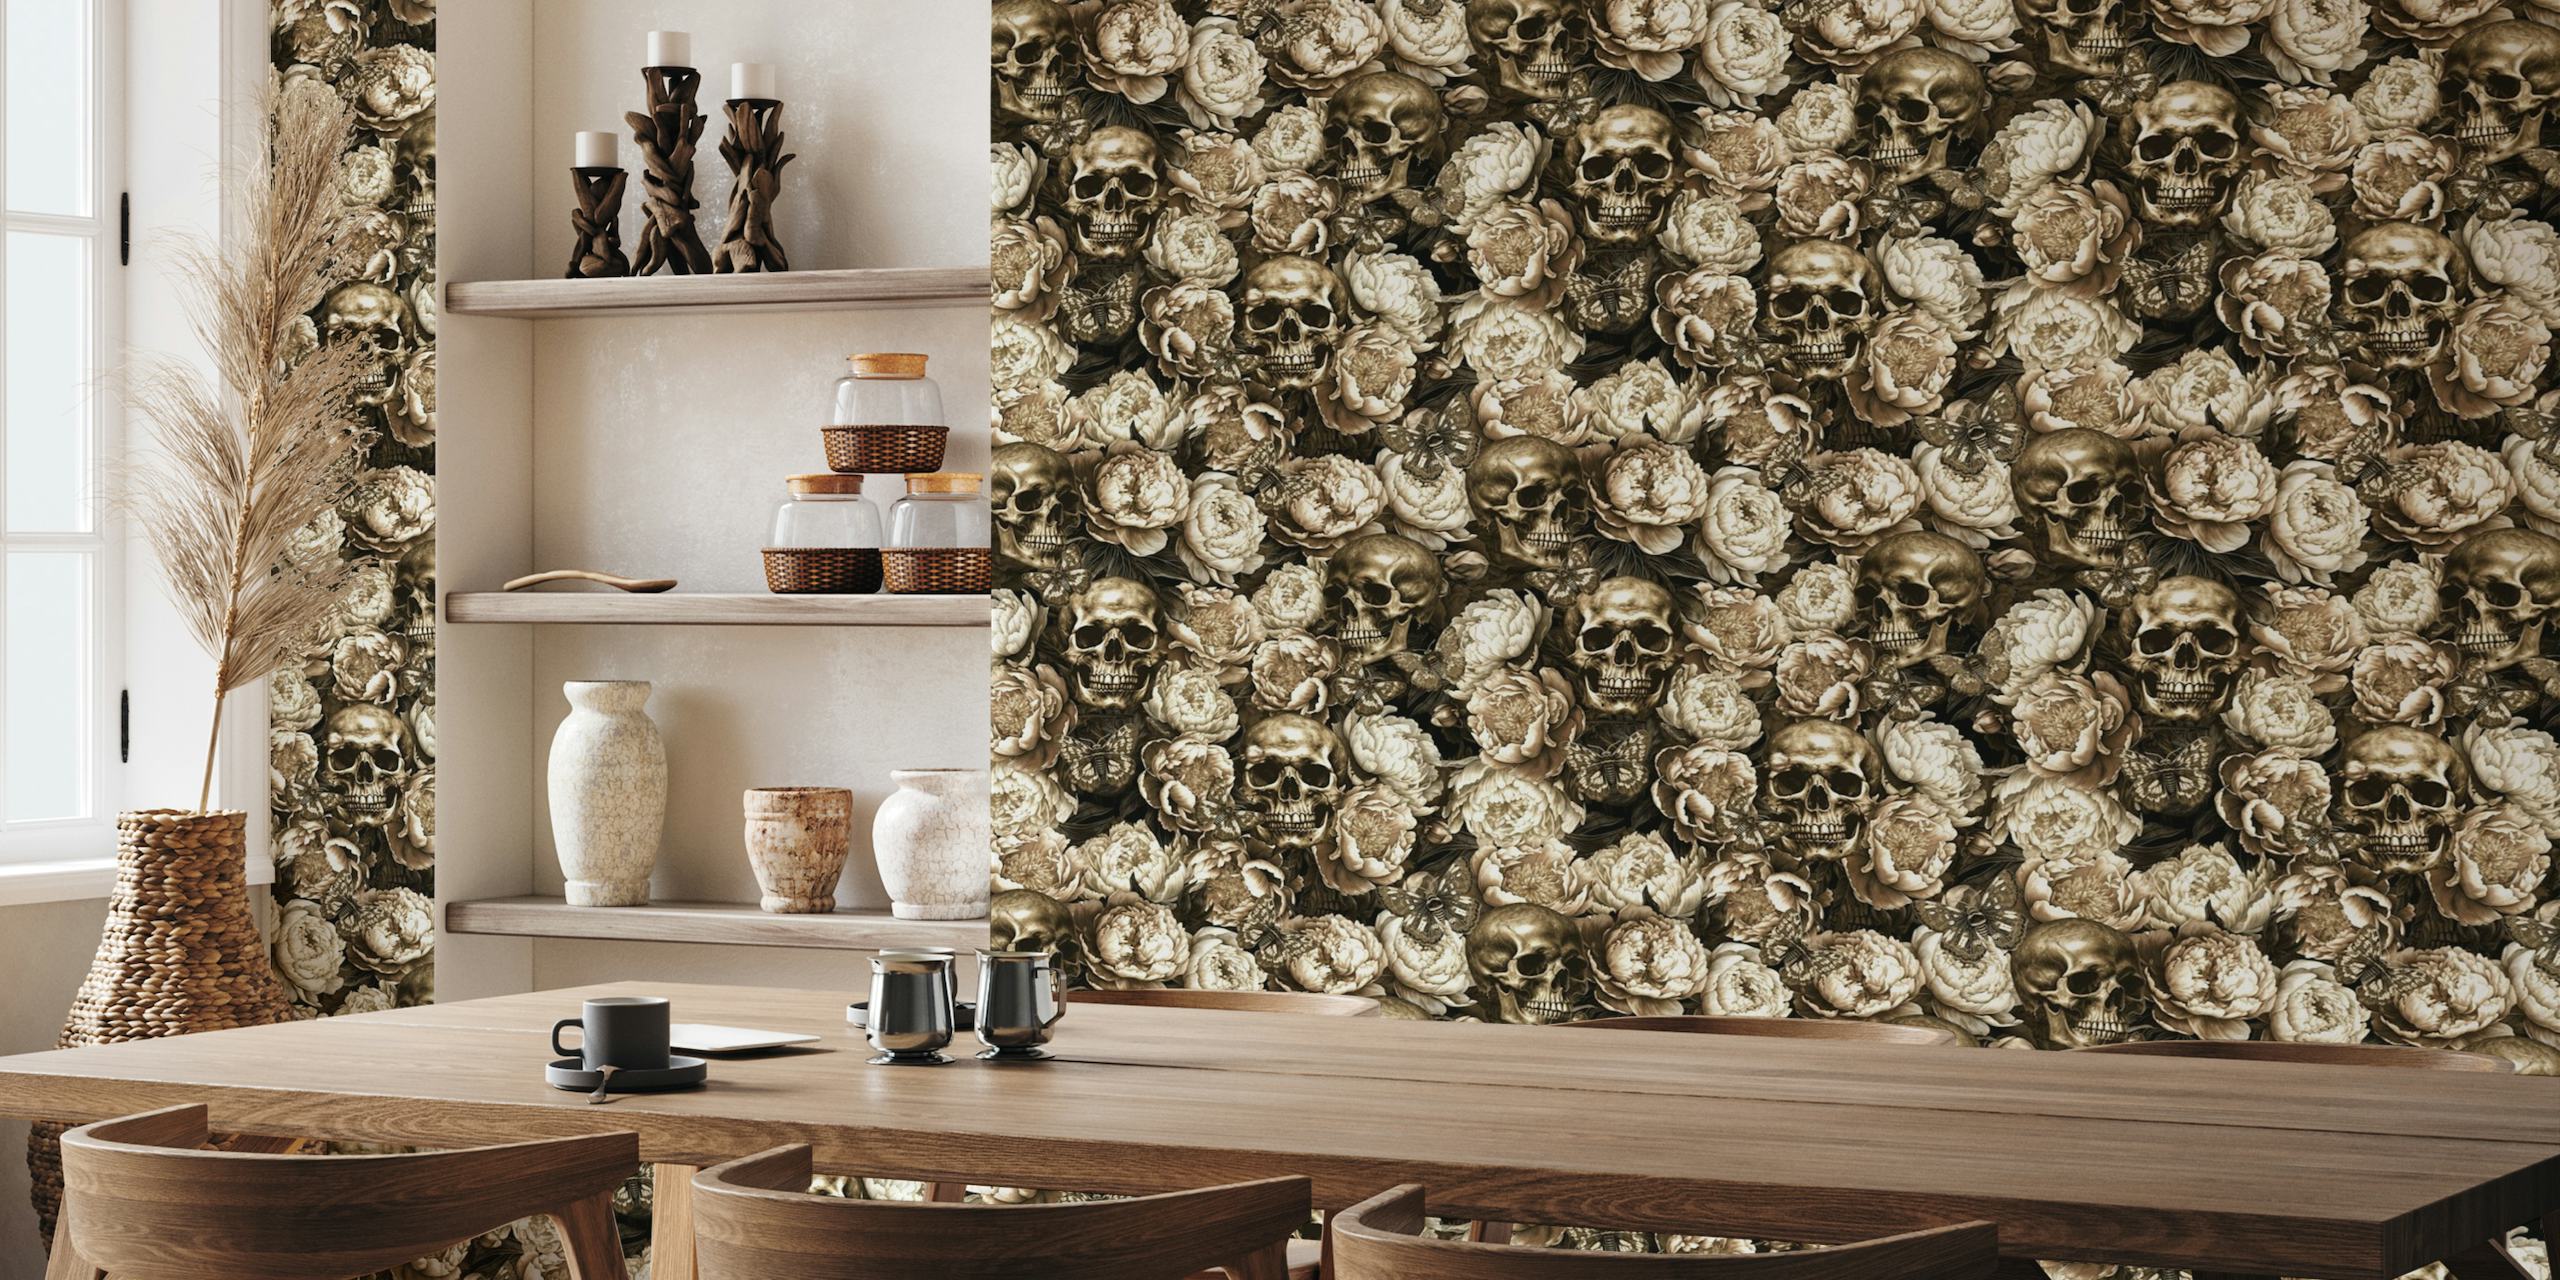 Dark-themed wall mural with baroque floral patterns and gothic skulls from happywall.com